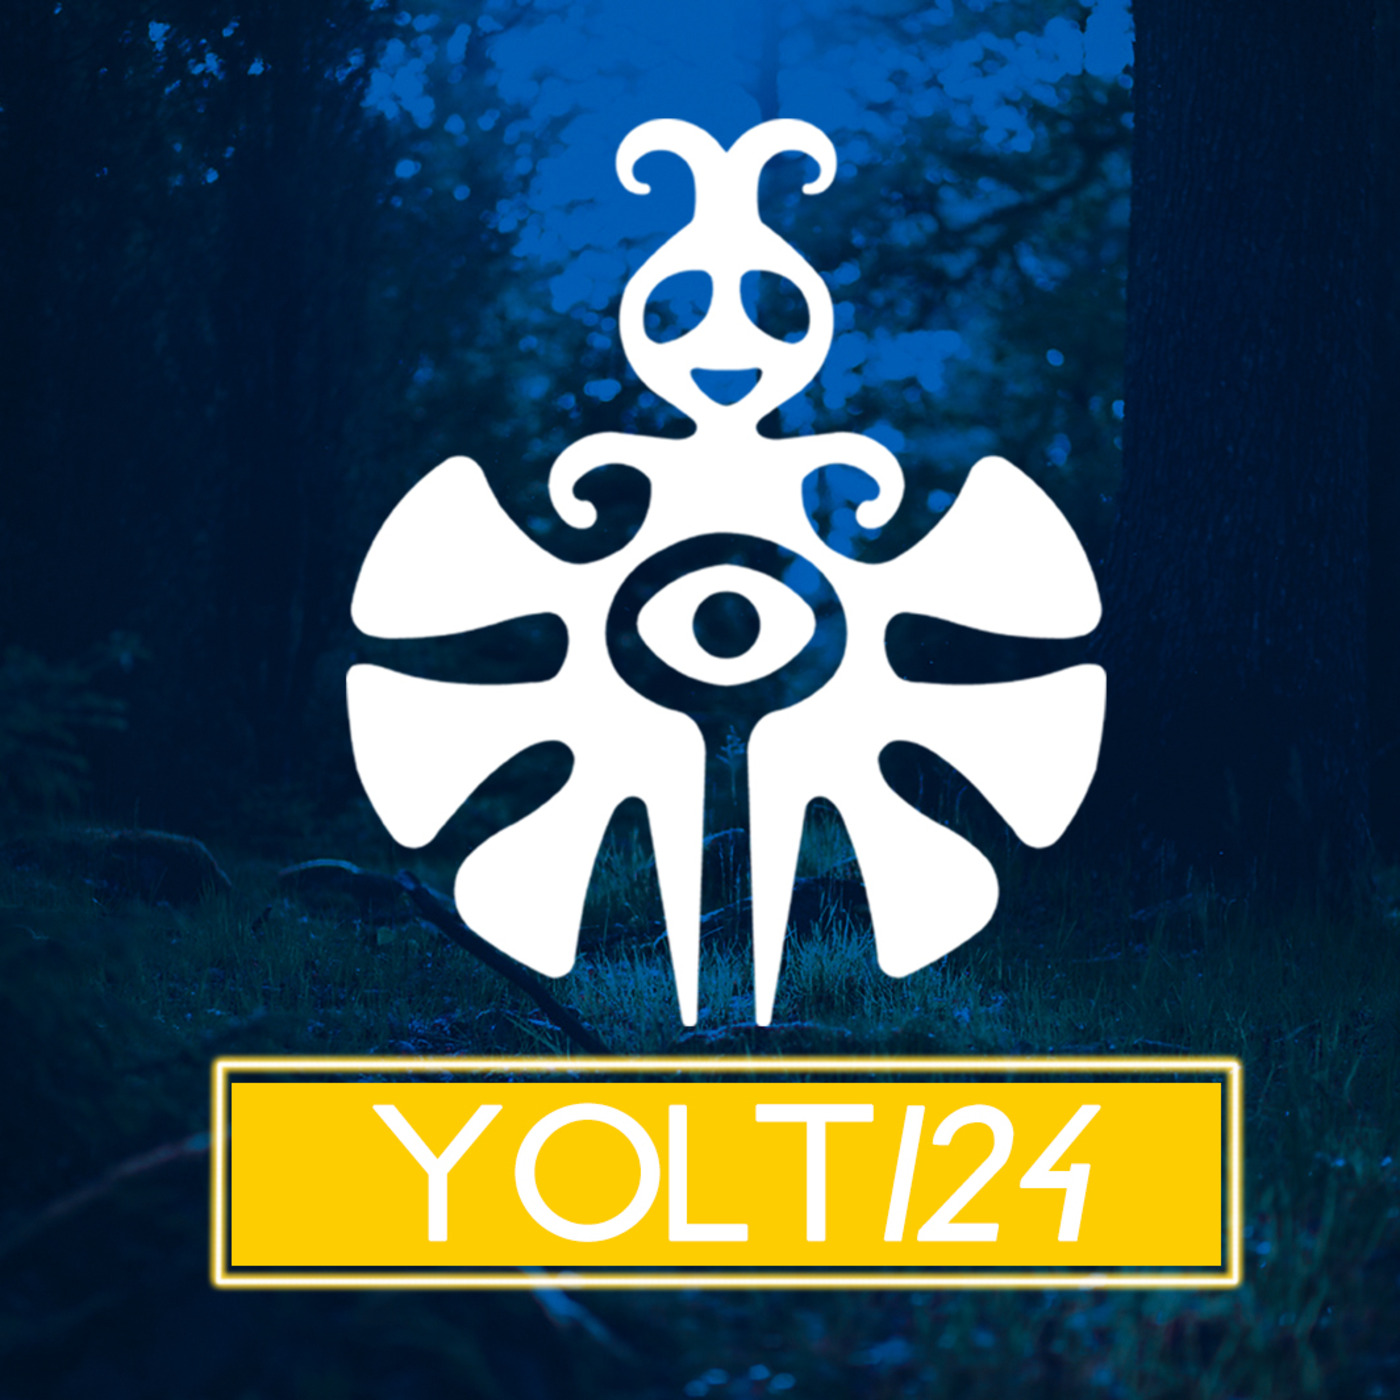 You Only Live Trance Episode 124 (#YOLT124) - Ness